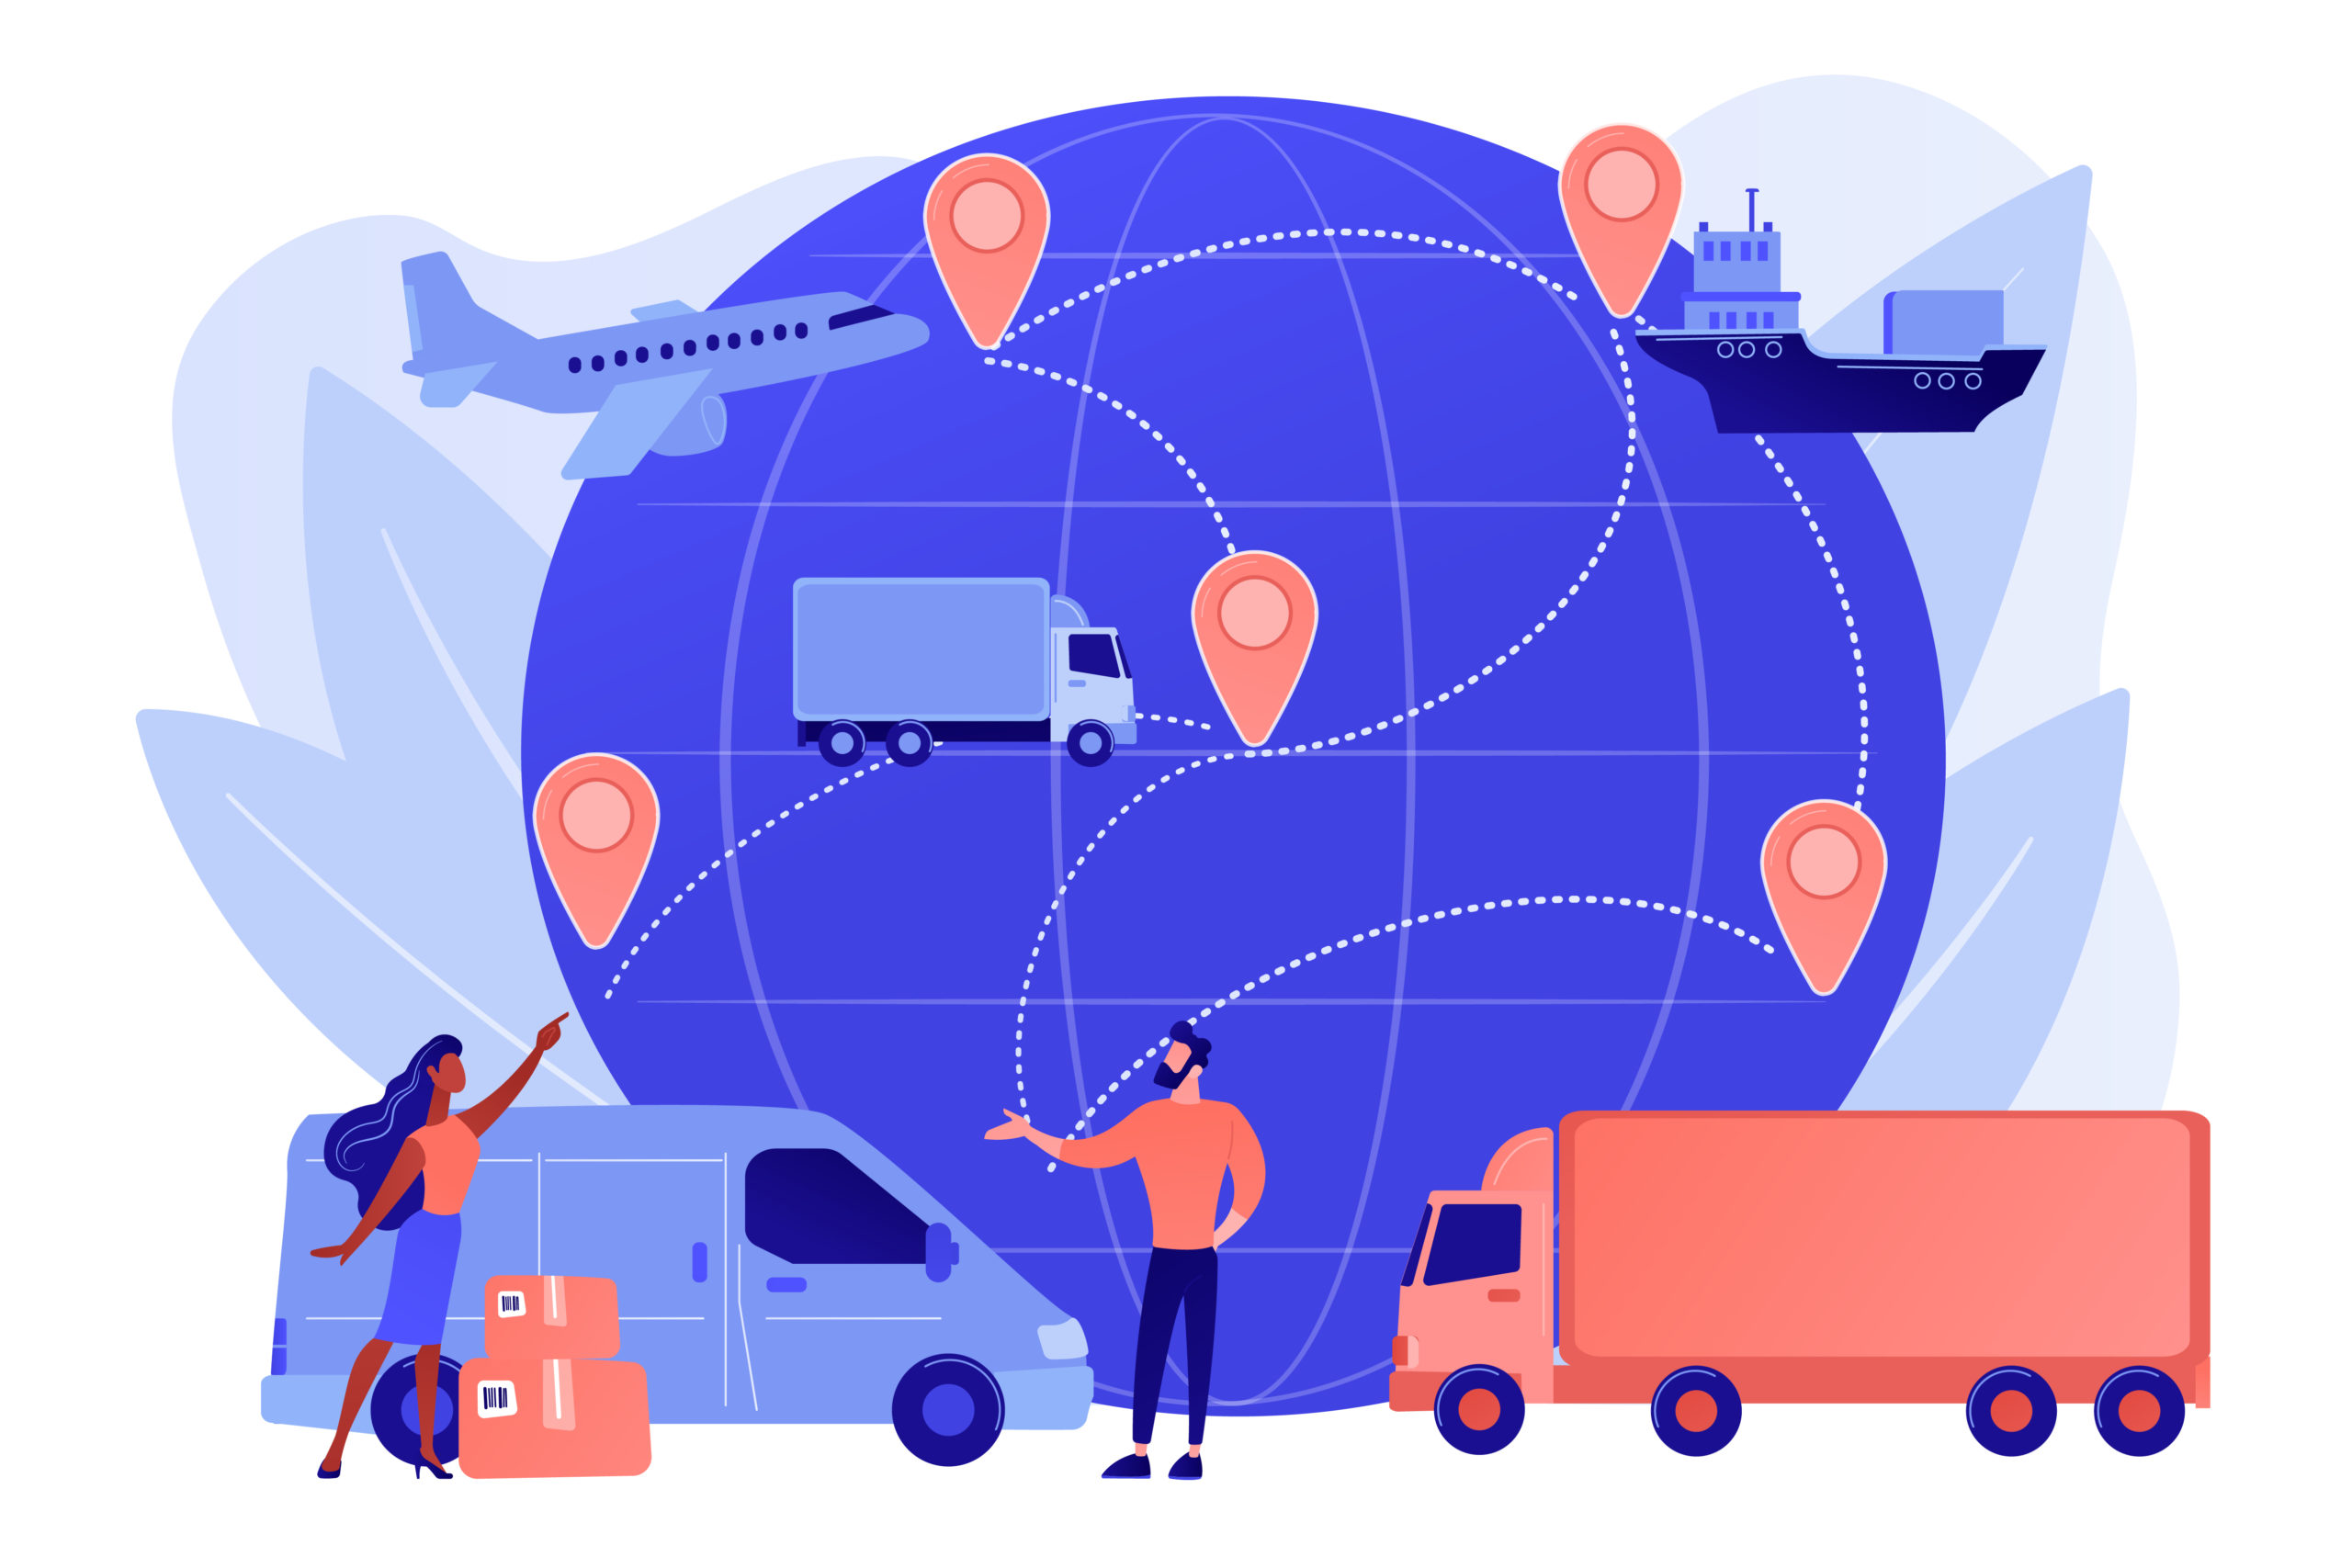 Internet store goods international shipment. Global transportation system, worldwide logistics and distribution, worldwide delivery service concept. Pinkish coral bluevector isolated illustration